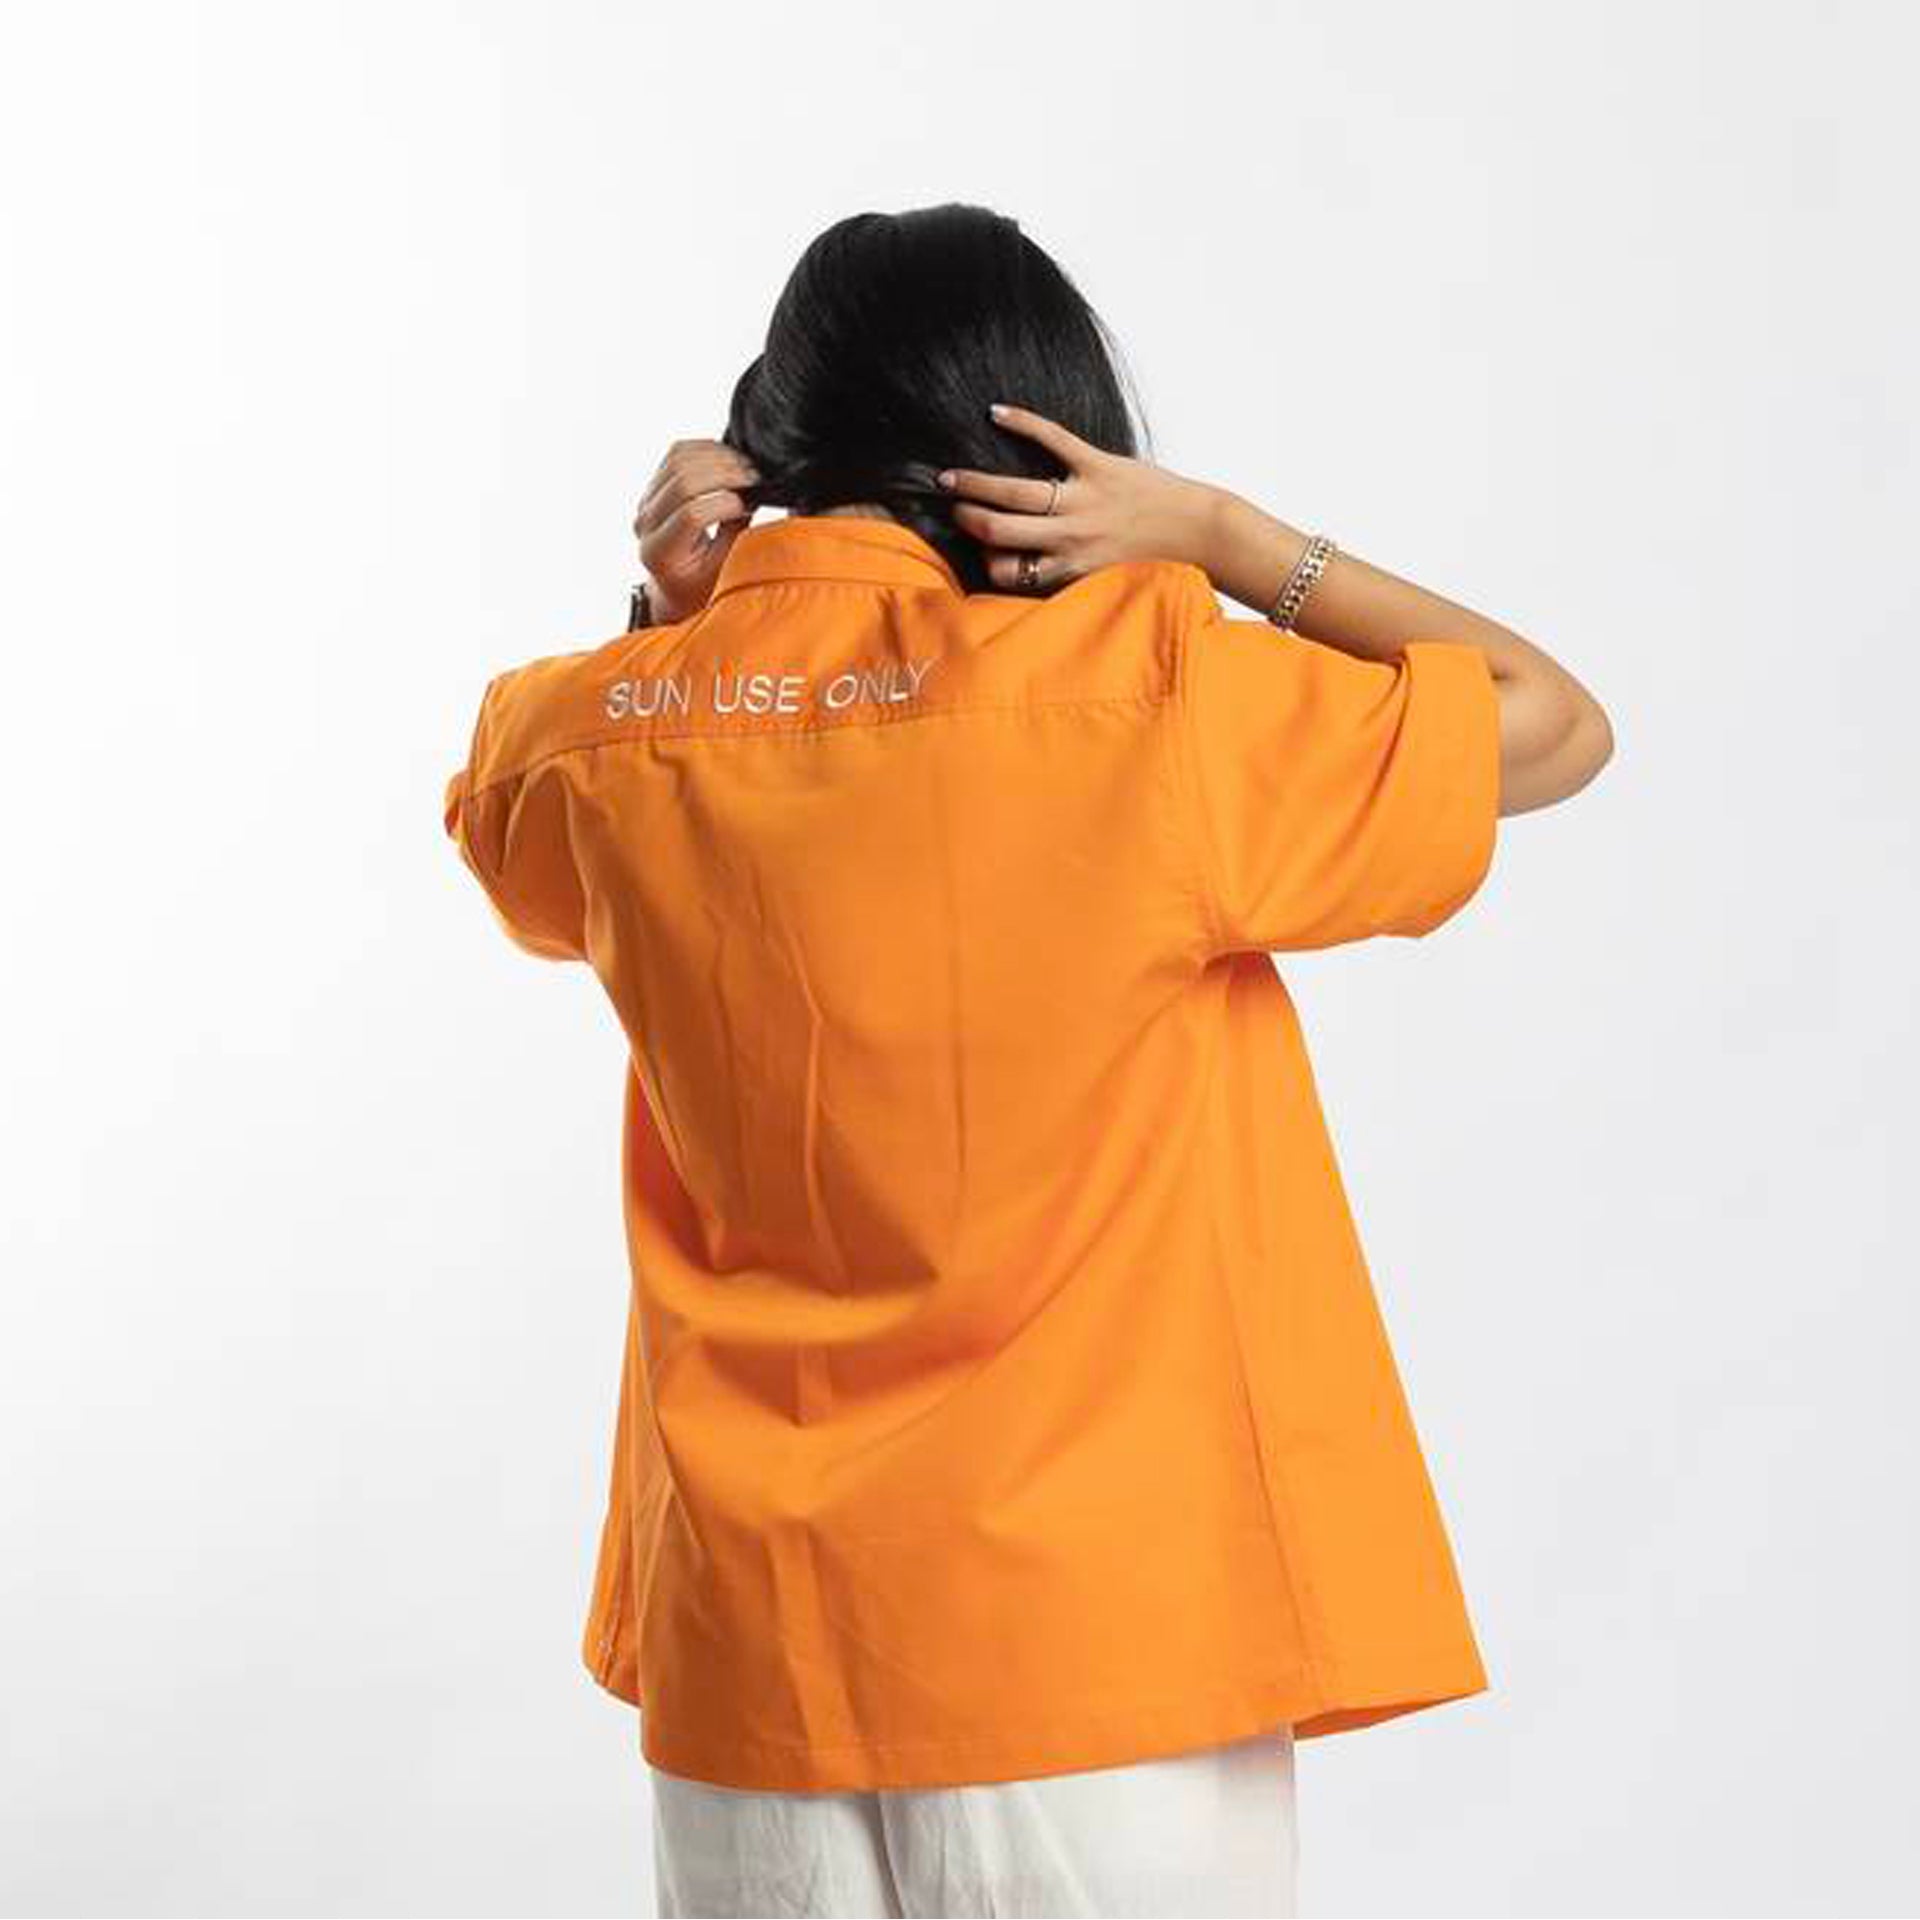 Orange Short-Sleeve Shirt With 'Sun Use Only' Typography on the Back From Hajruss